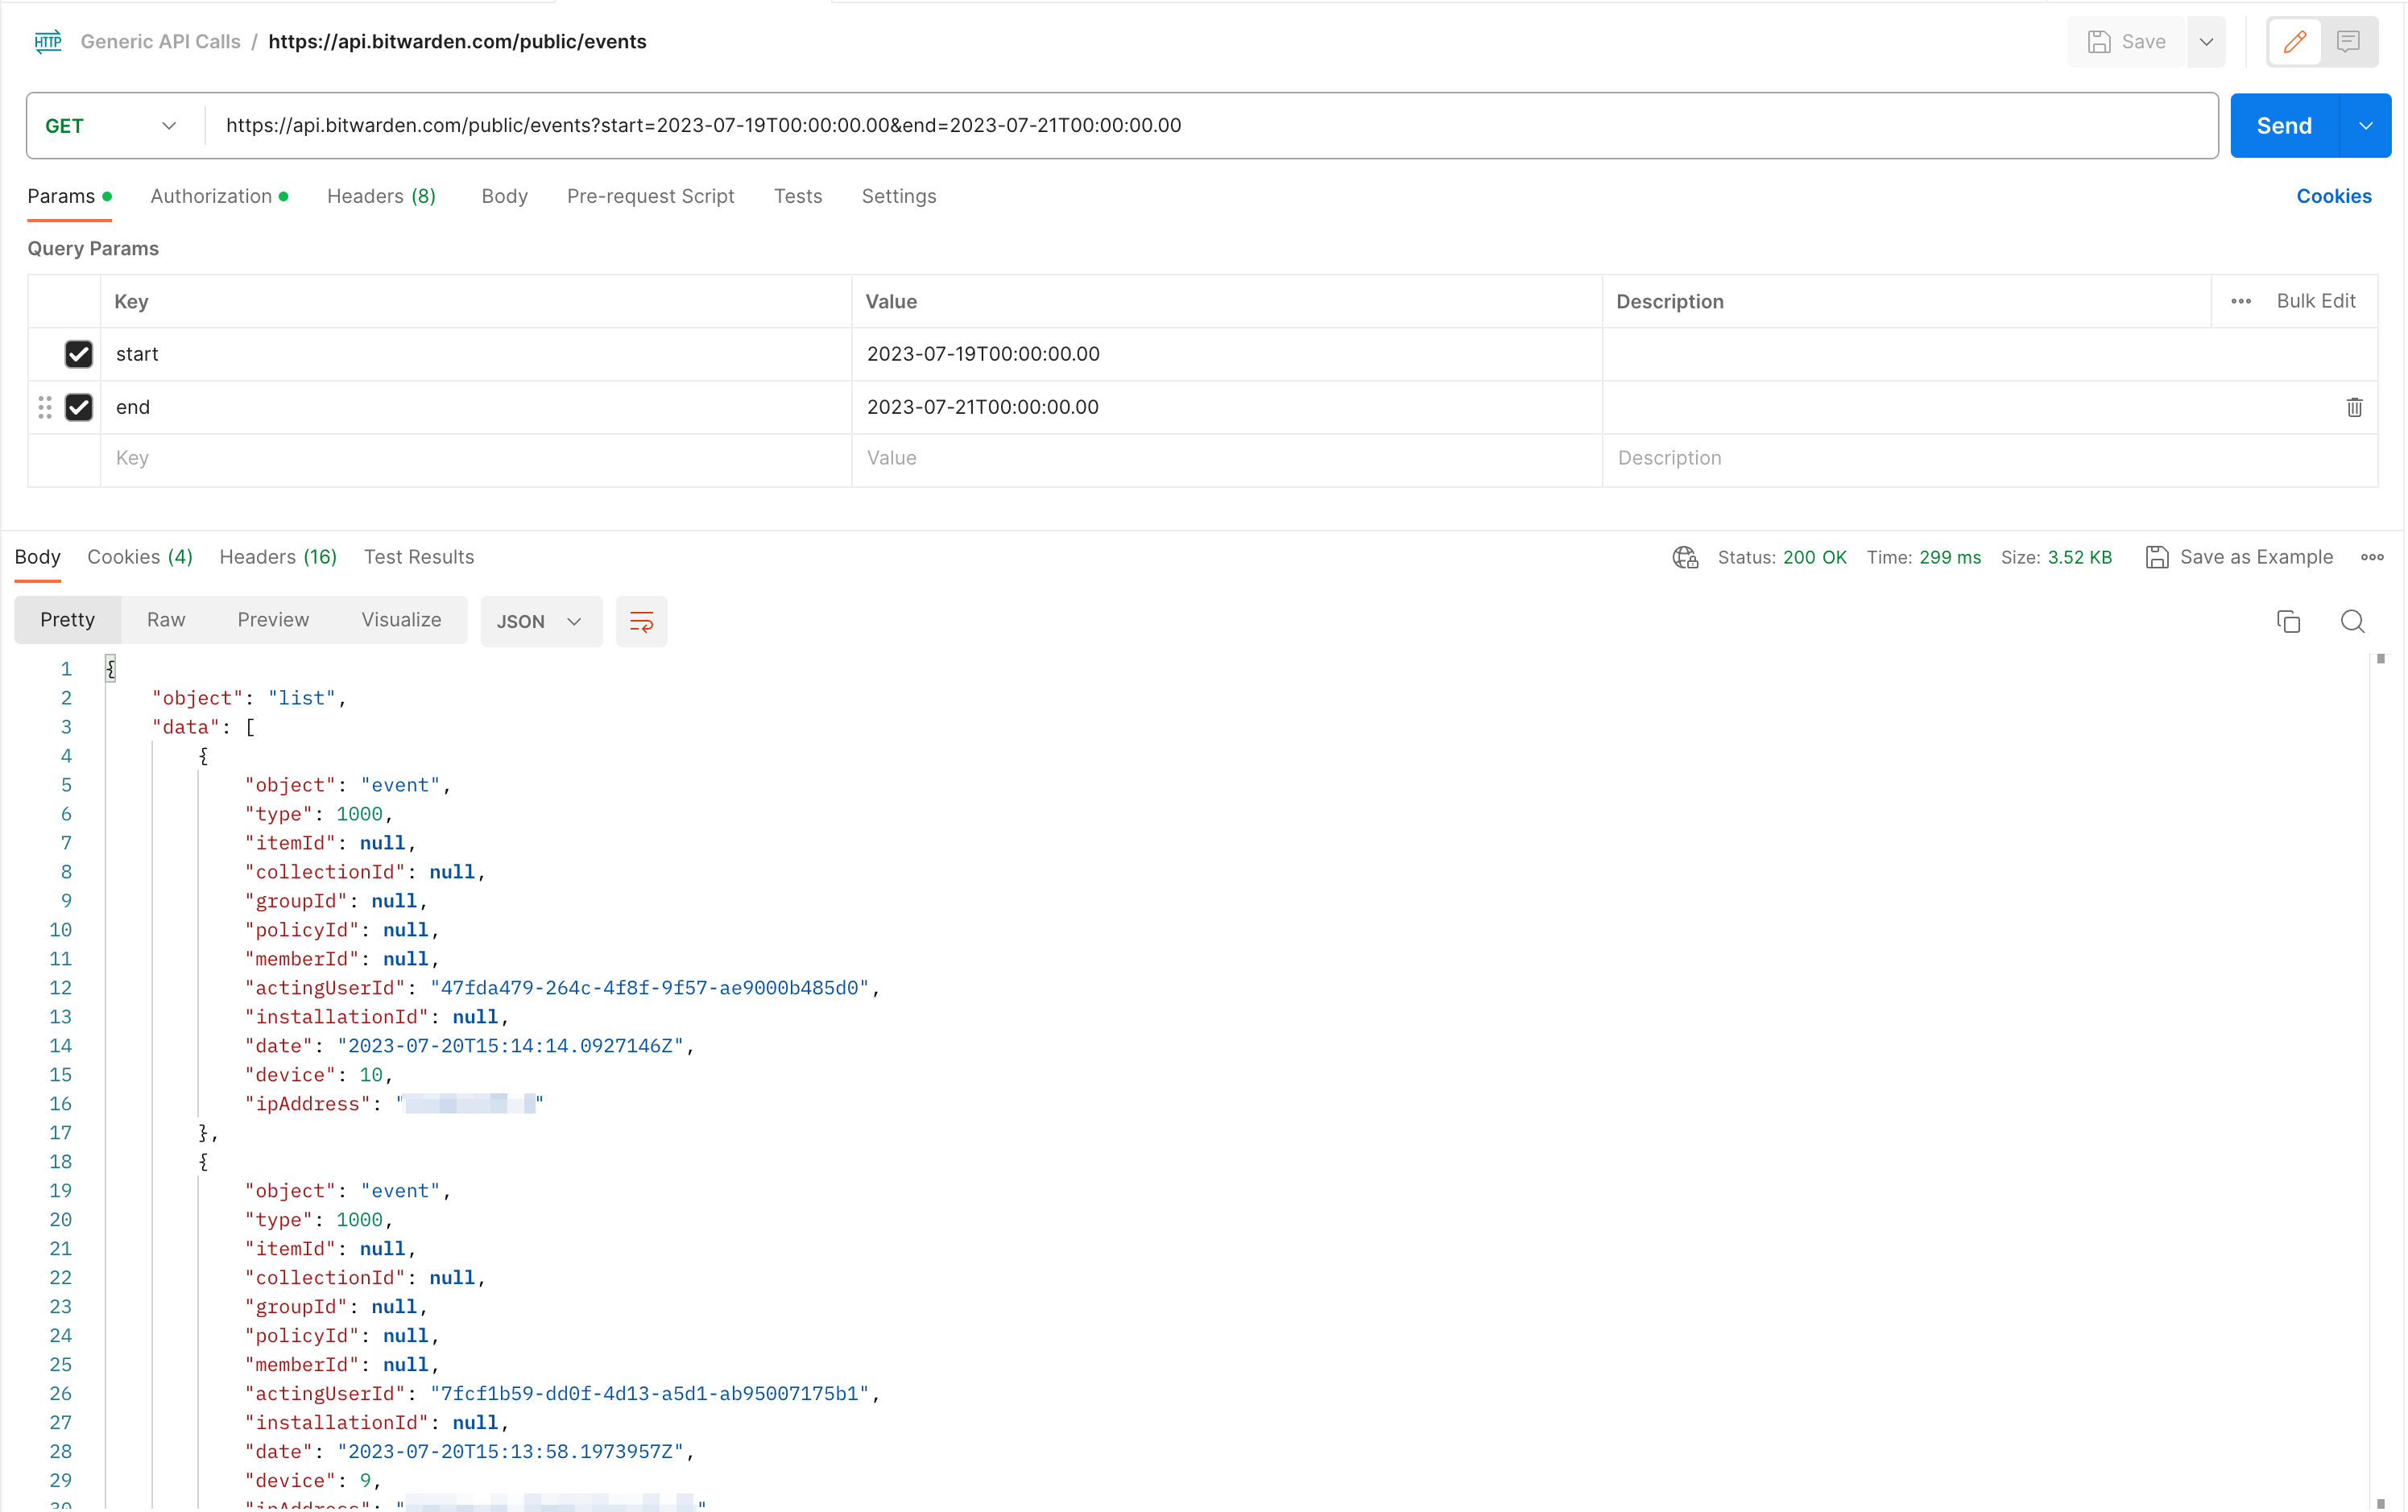 Guide to using Postman to access the Bitwarden API - Password Manager ...